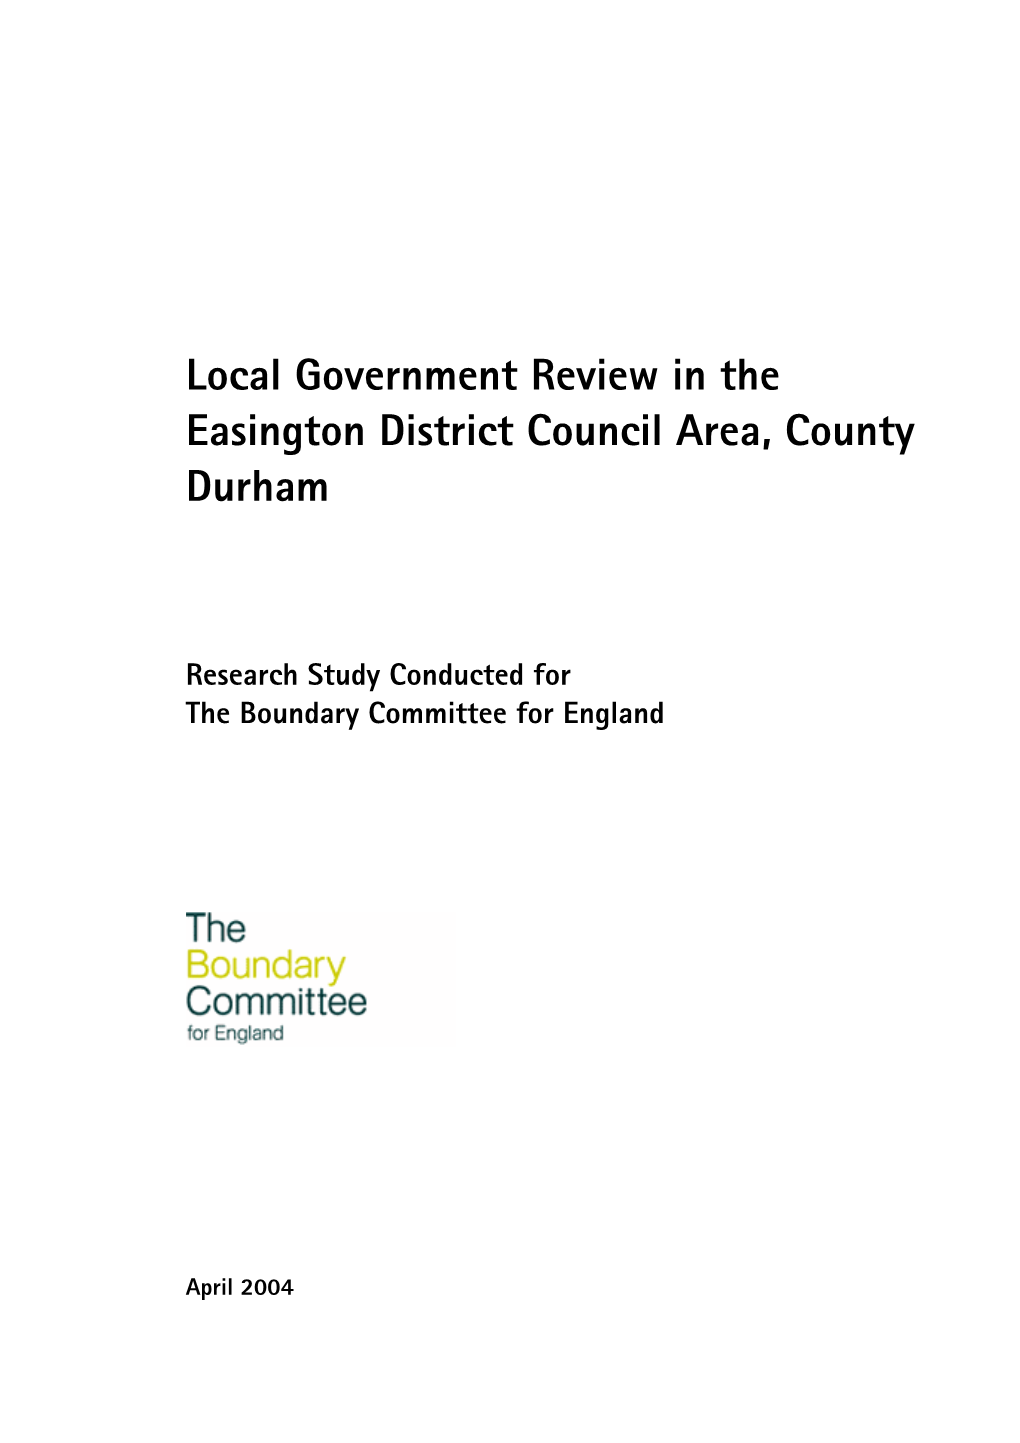 Local Government Review in the Easington District Council Area, County Durham